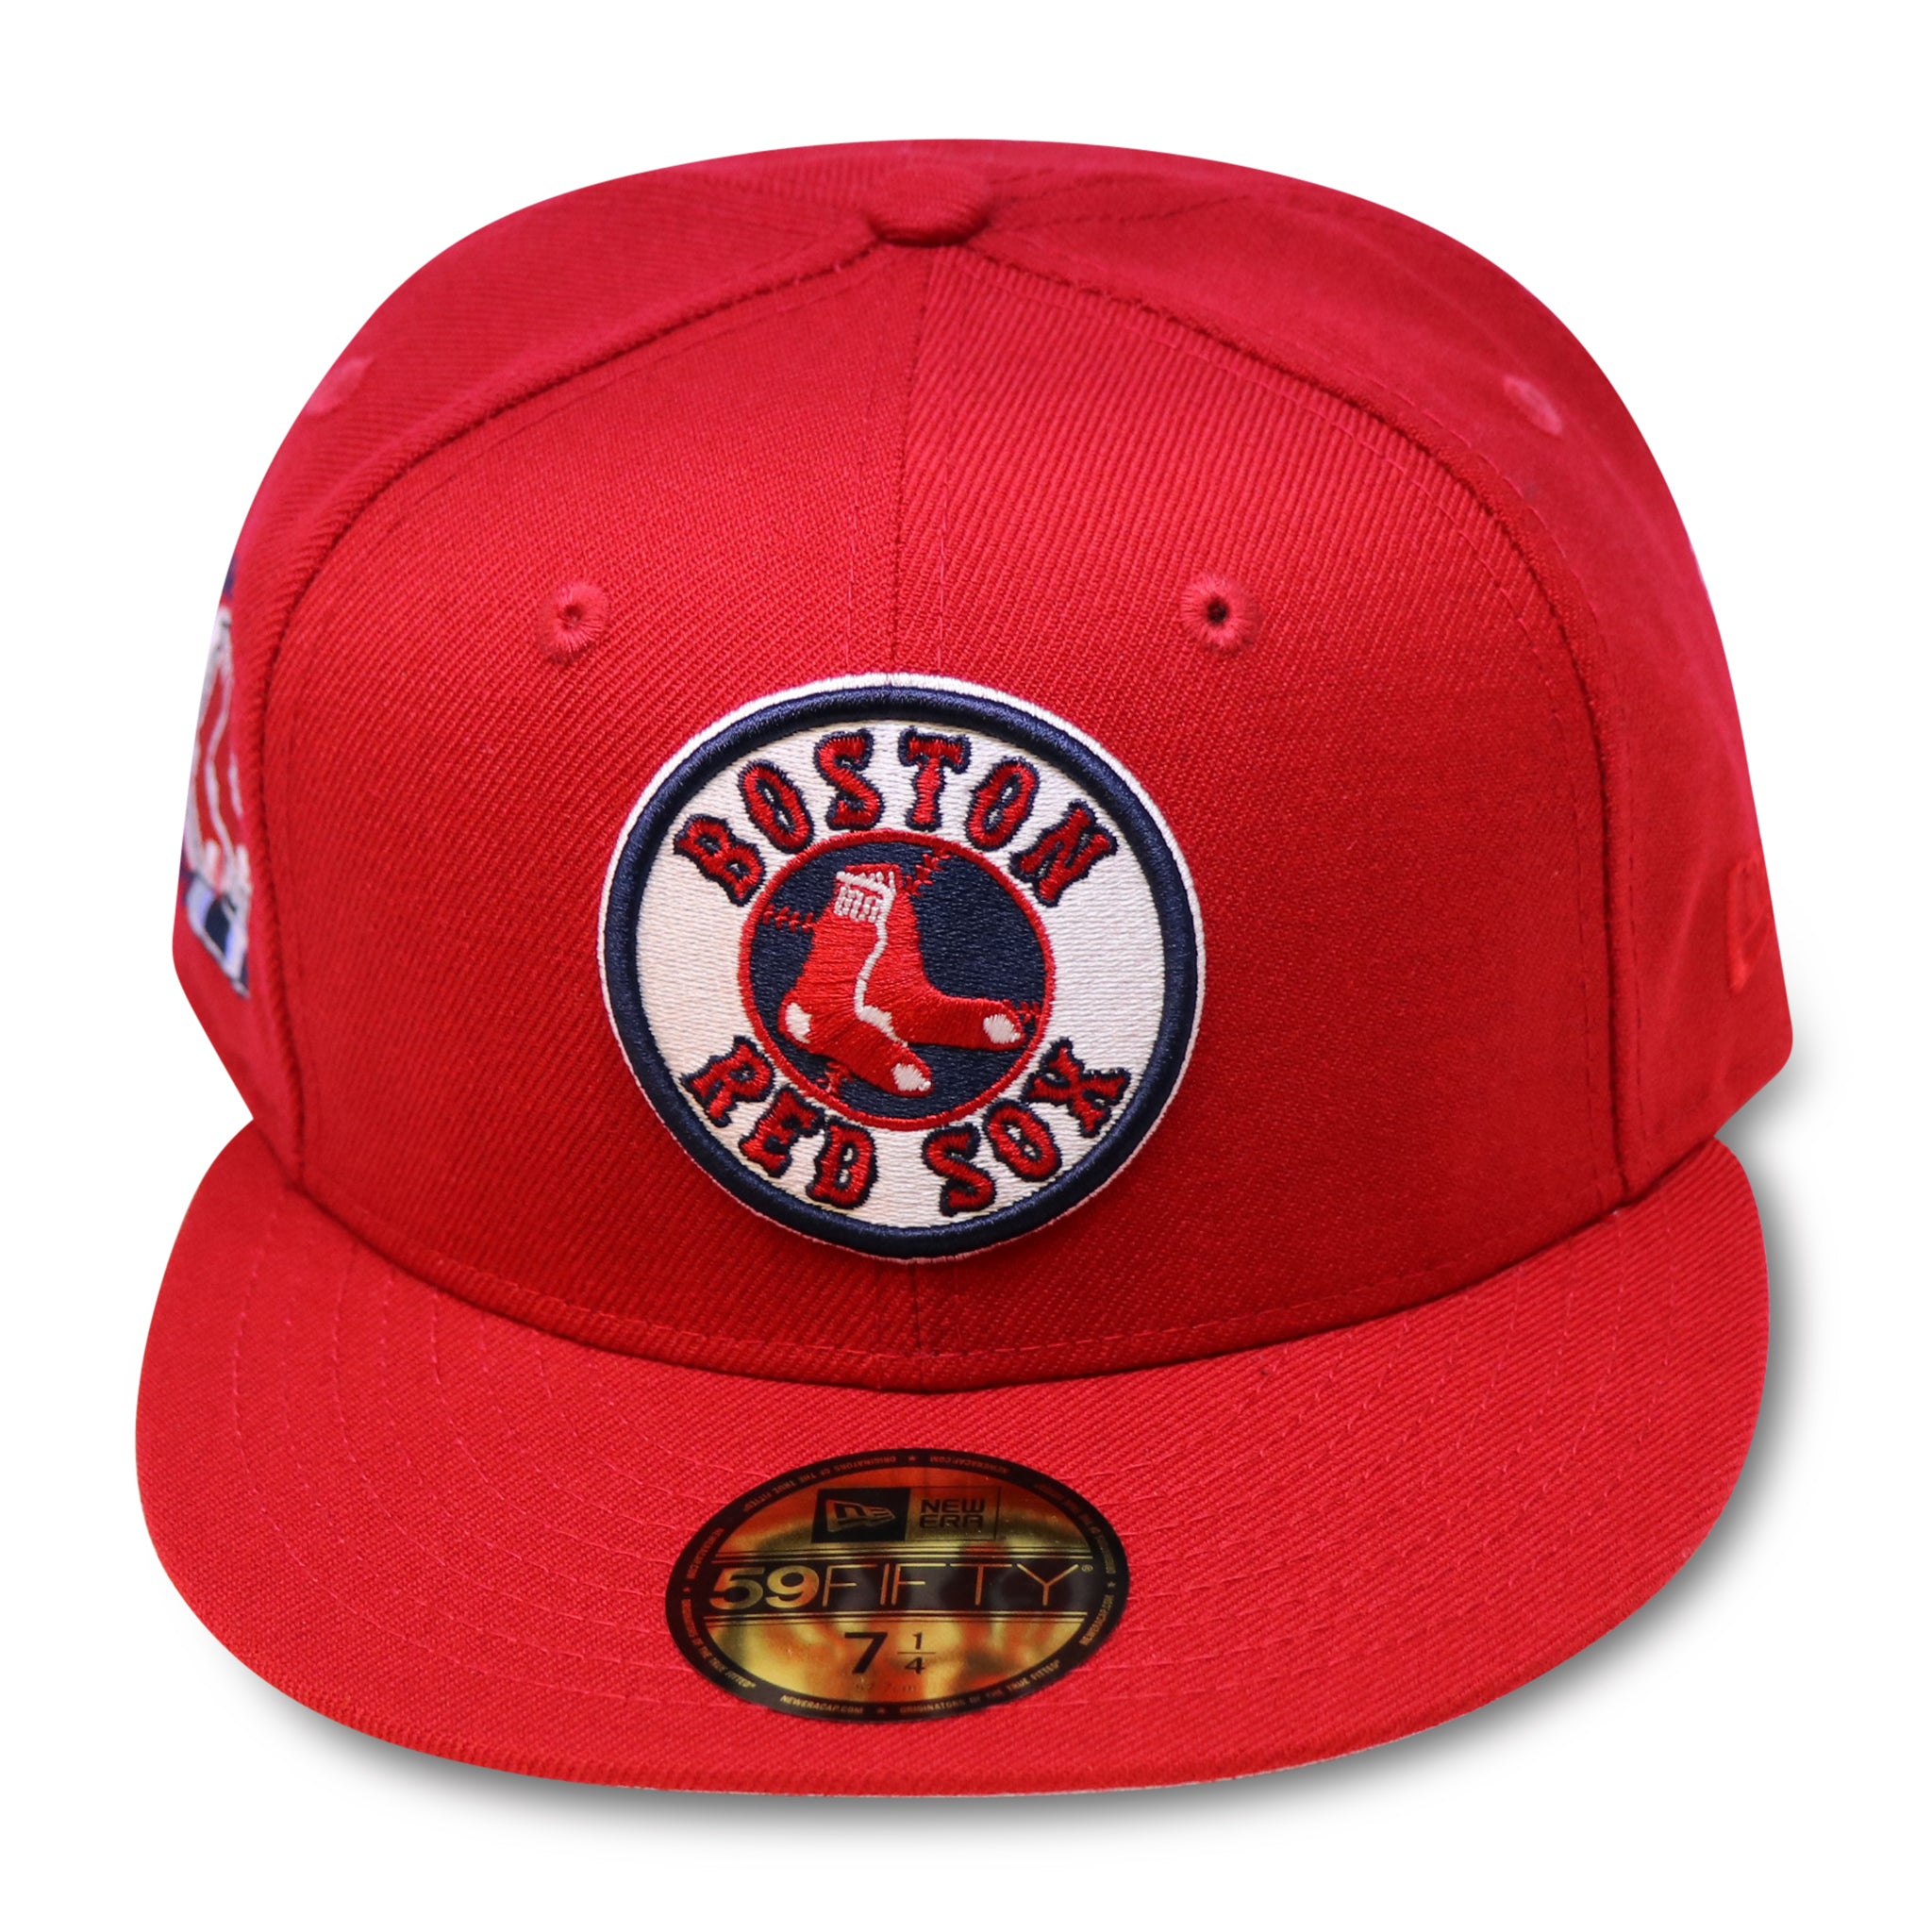 BOSTON REDSOX (8X CHAMPS) NEW ERA 59FIFTY FITTED